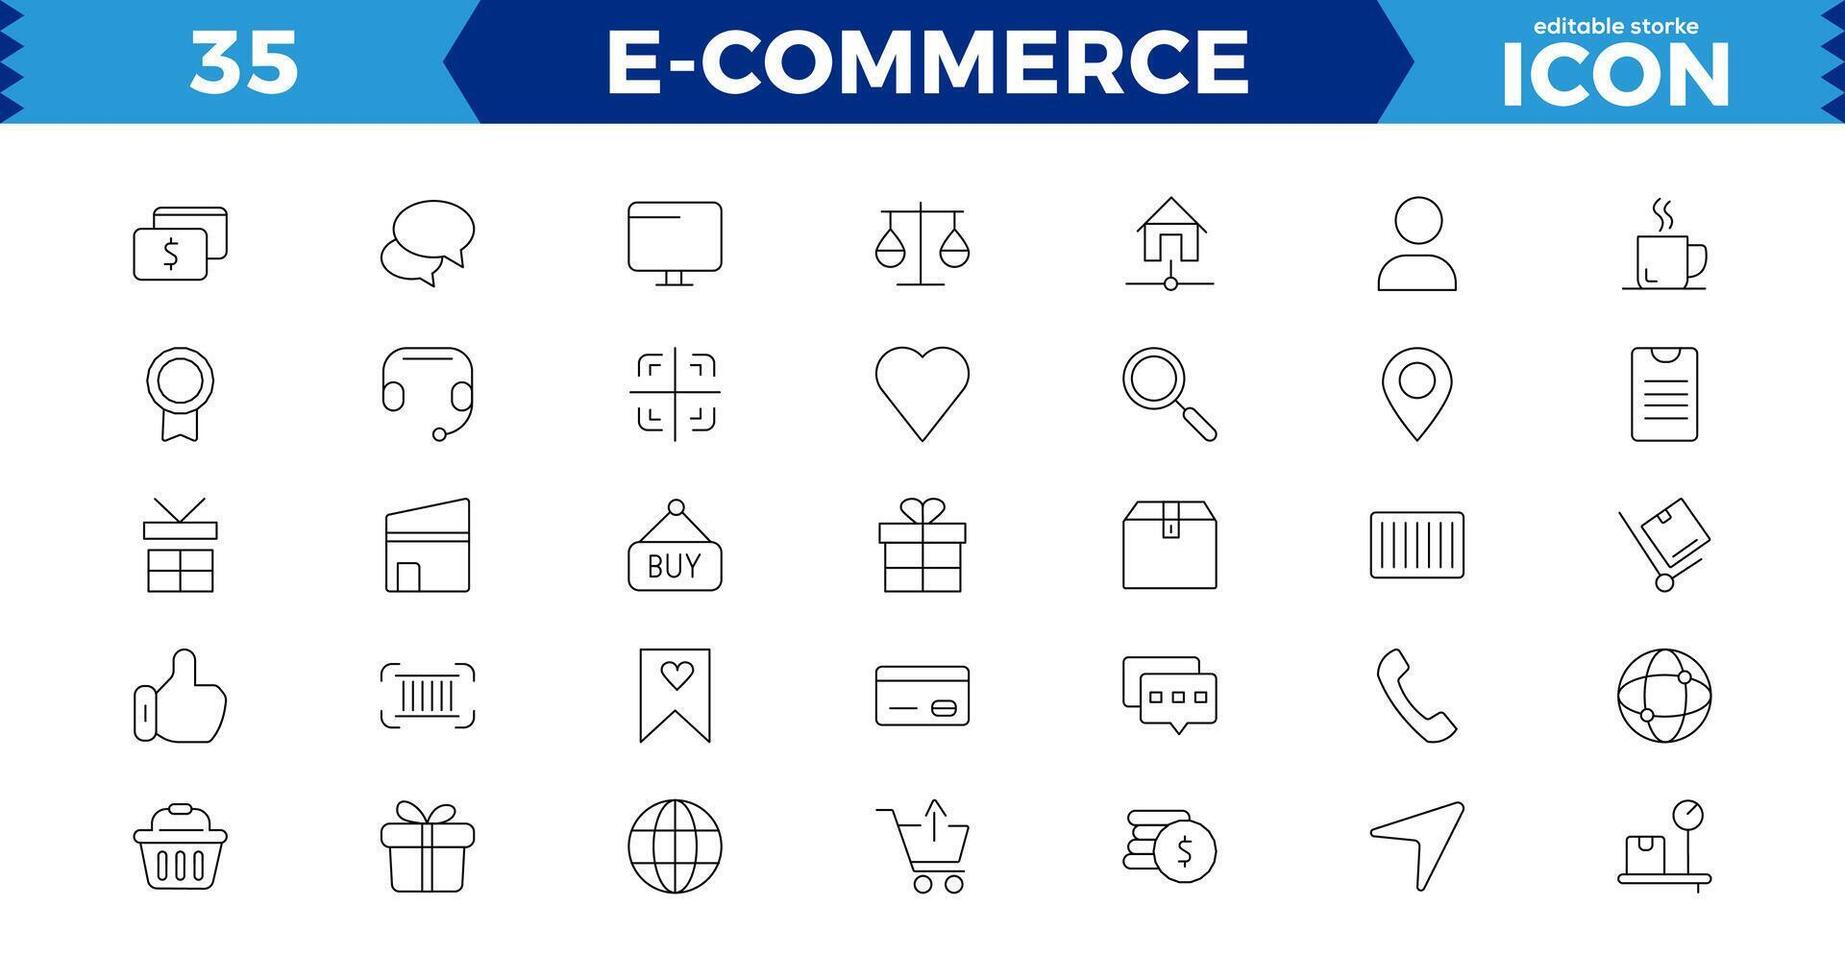 E-Commerce set of web icons in line style..Online shopping icons for web and mobile app. .Business, bank card, .gifts, sale, delivery. E-business symbol. Solid icons collection vector